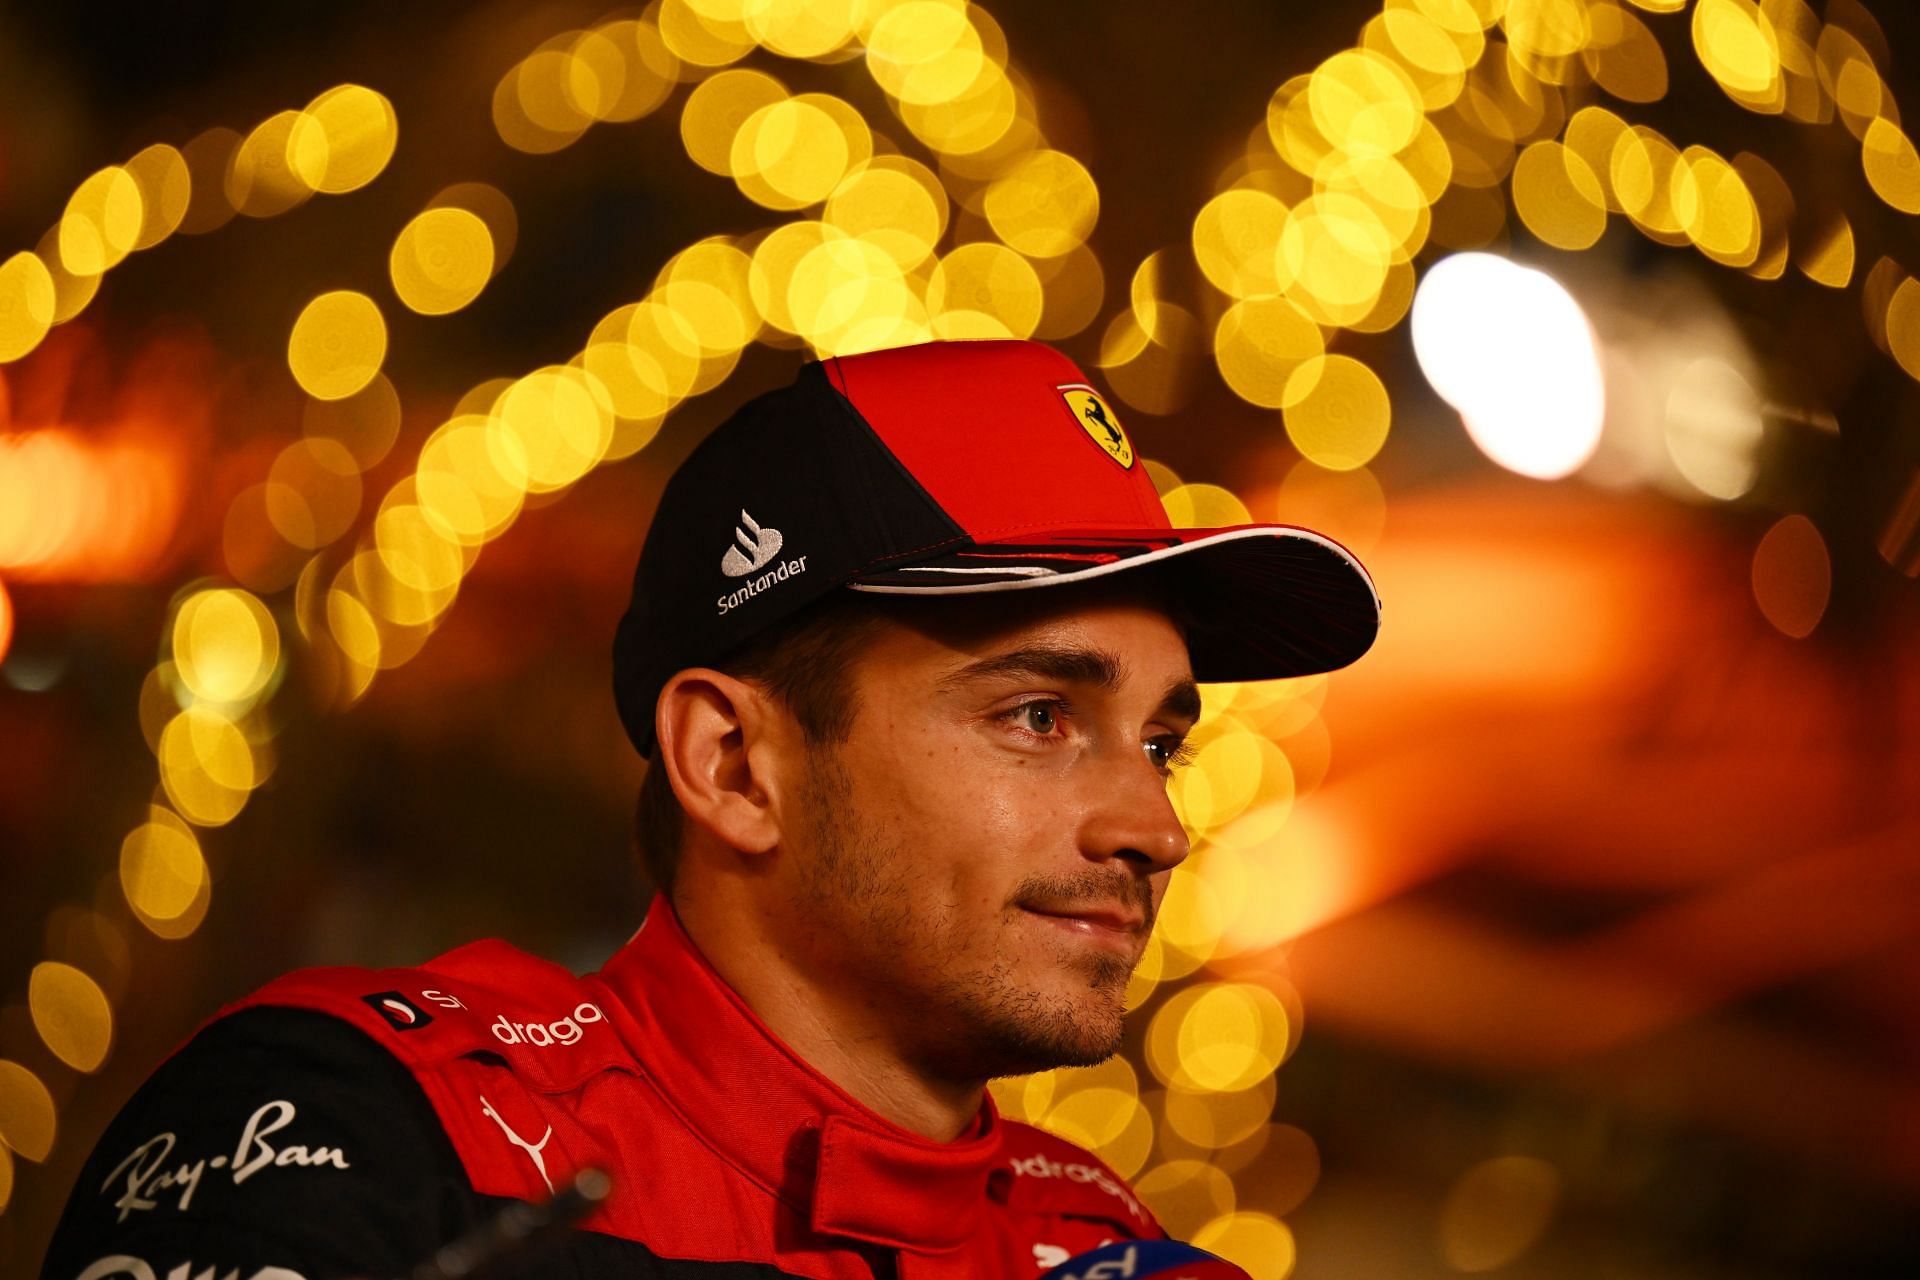 Charles Leclerc beat Max Verstappen to snatch pole position for the Bahrain GP